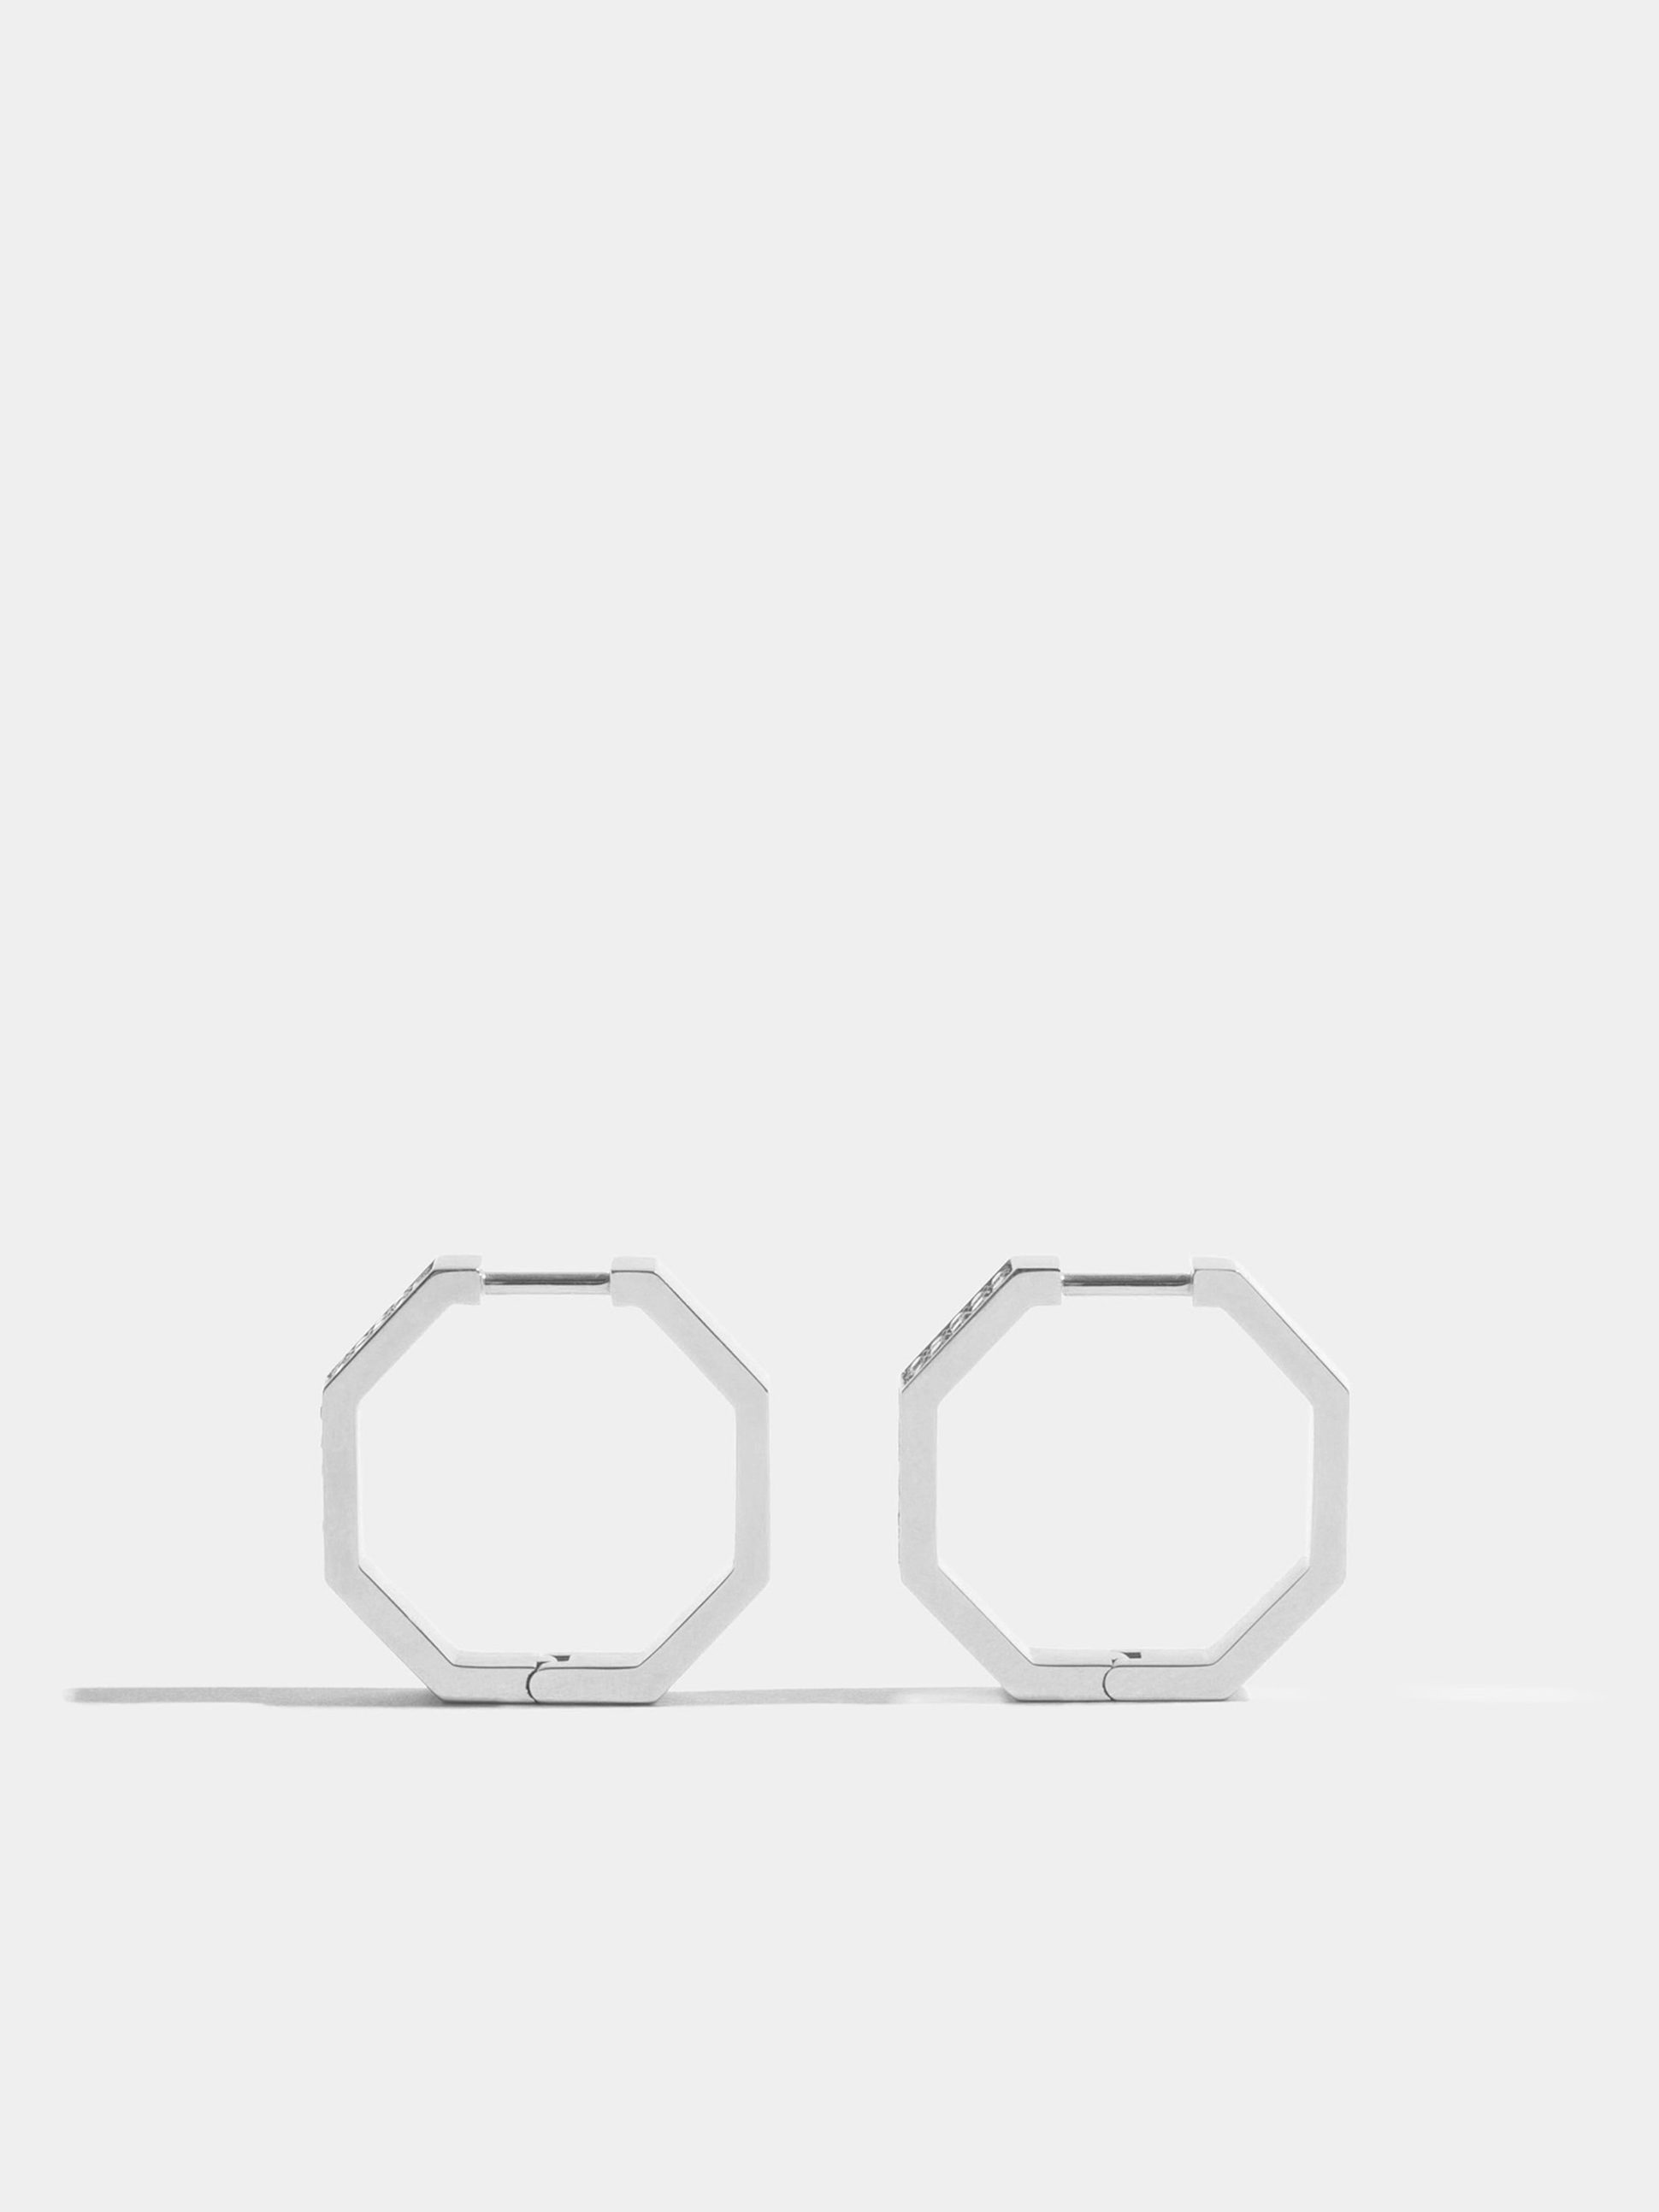 Octogone 18mm earrings in 18k Fairmined ethical white gold, paved with lab-grown diamonds, the pair.